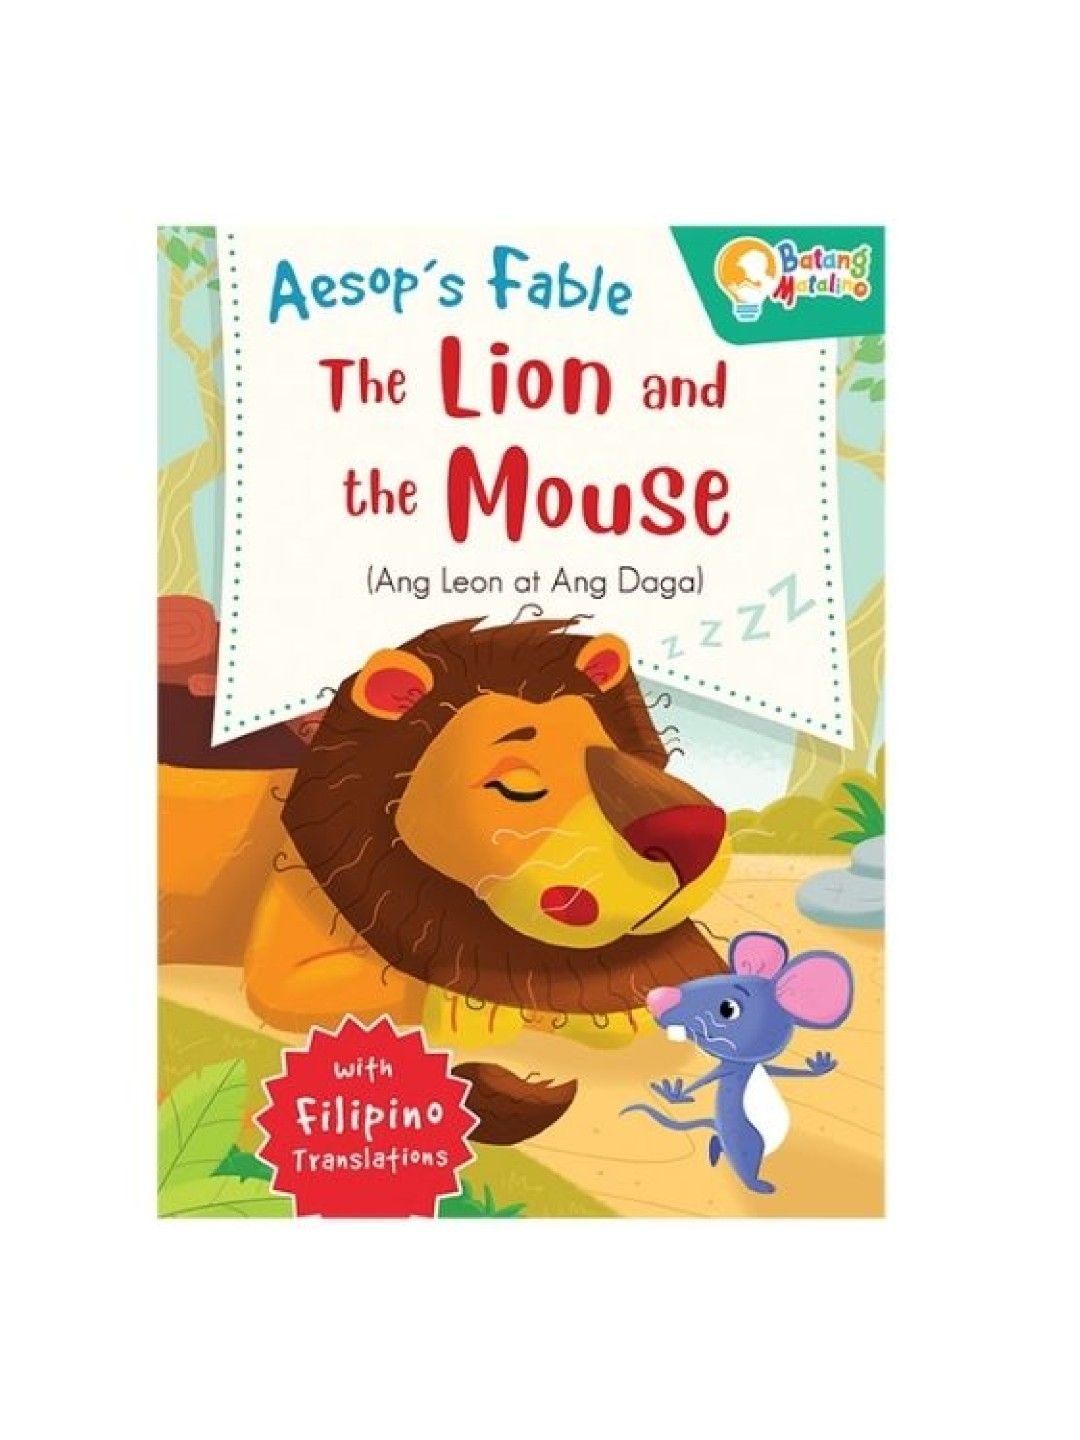 Learning is Fun Batang Matalino Aesop's Fable - The Lion And The Mouse